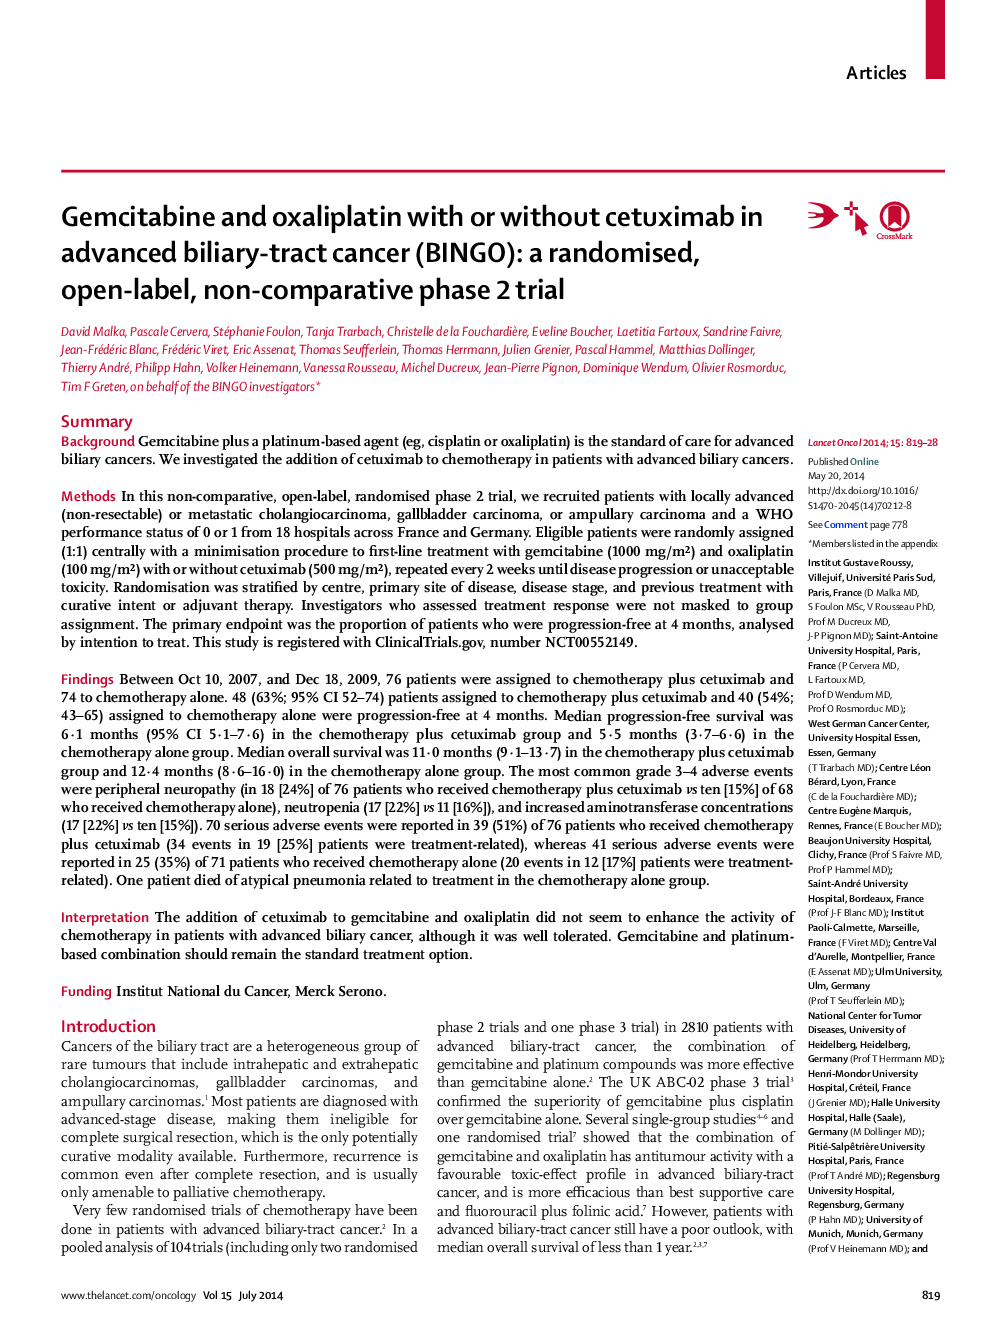 Gemcitabine and oxaliplatin with or without cetuximab in advanced biliary-tract cancer (BINGO): a randomised, open-label, non-comparative phase 2 trial